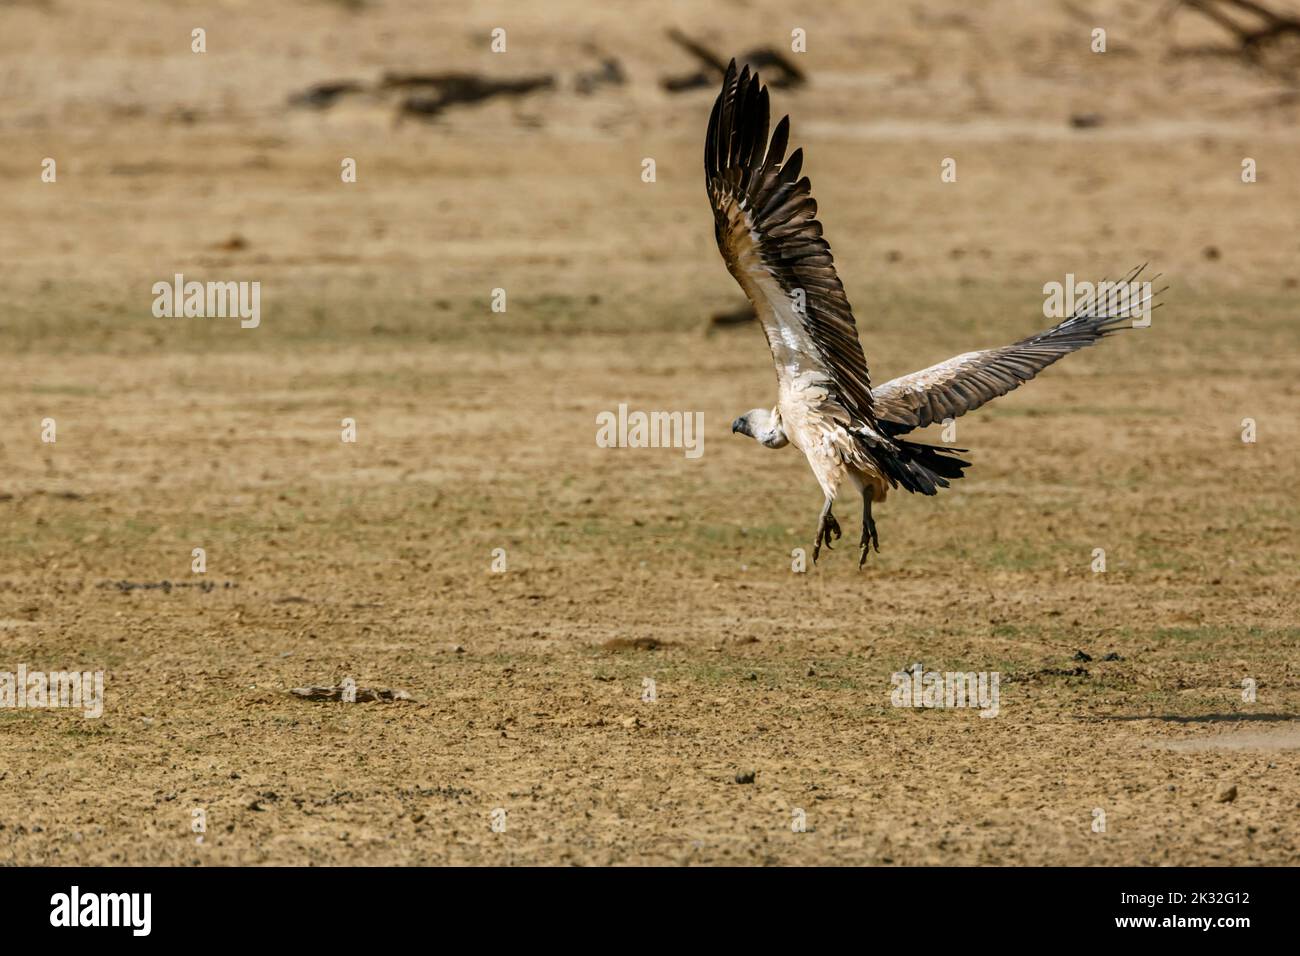 White backed Vulture in flight taking off in Kgalagadi transfrontier park, South Africa; Specie Gyps africanus family of Accipitridae Stock Photo